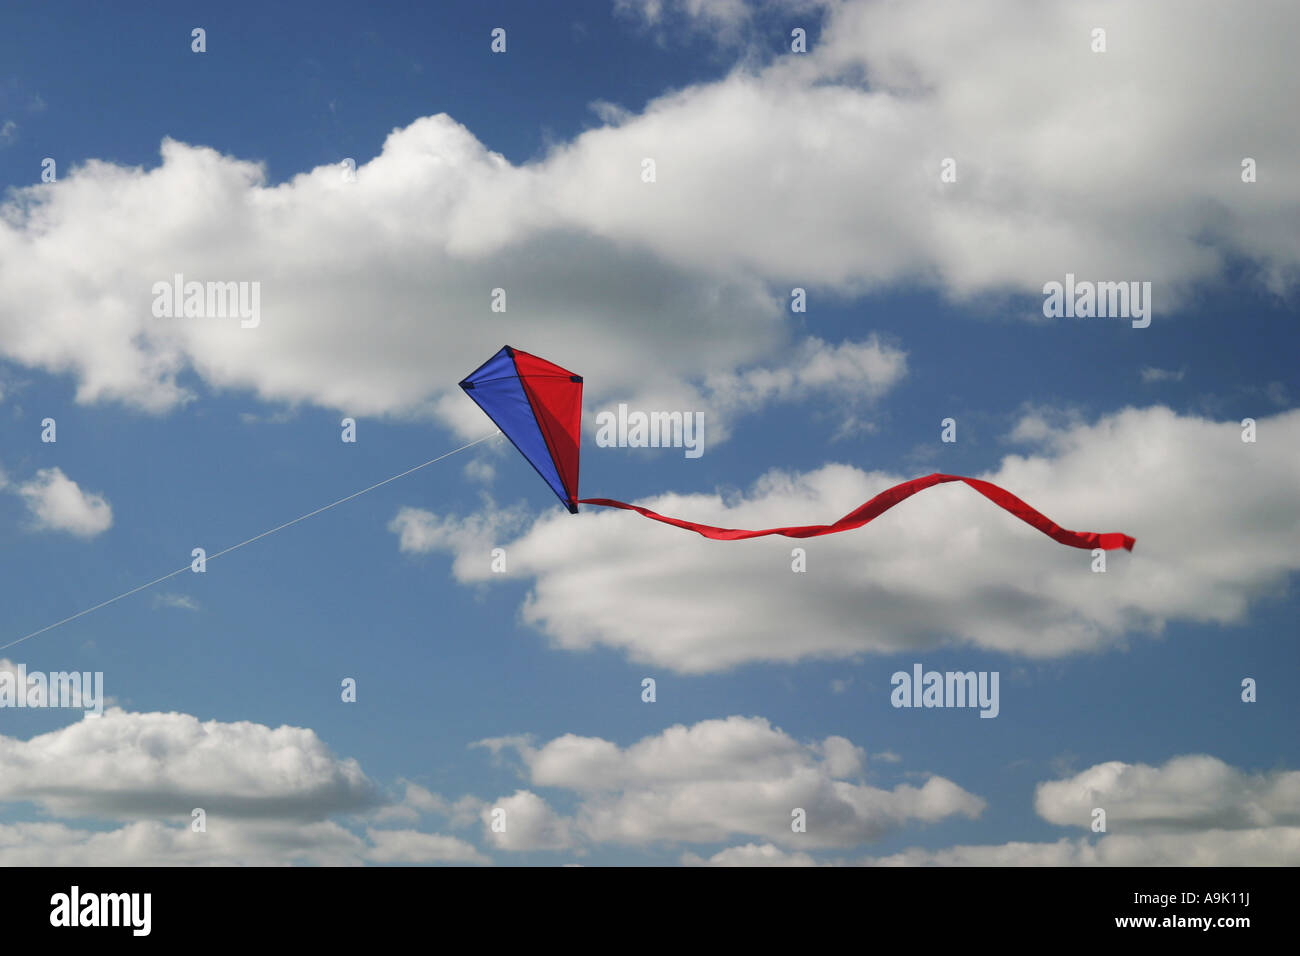 a kite flying high in the sky Stock Photo